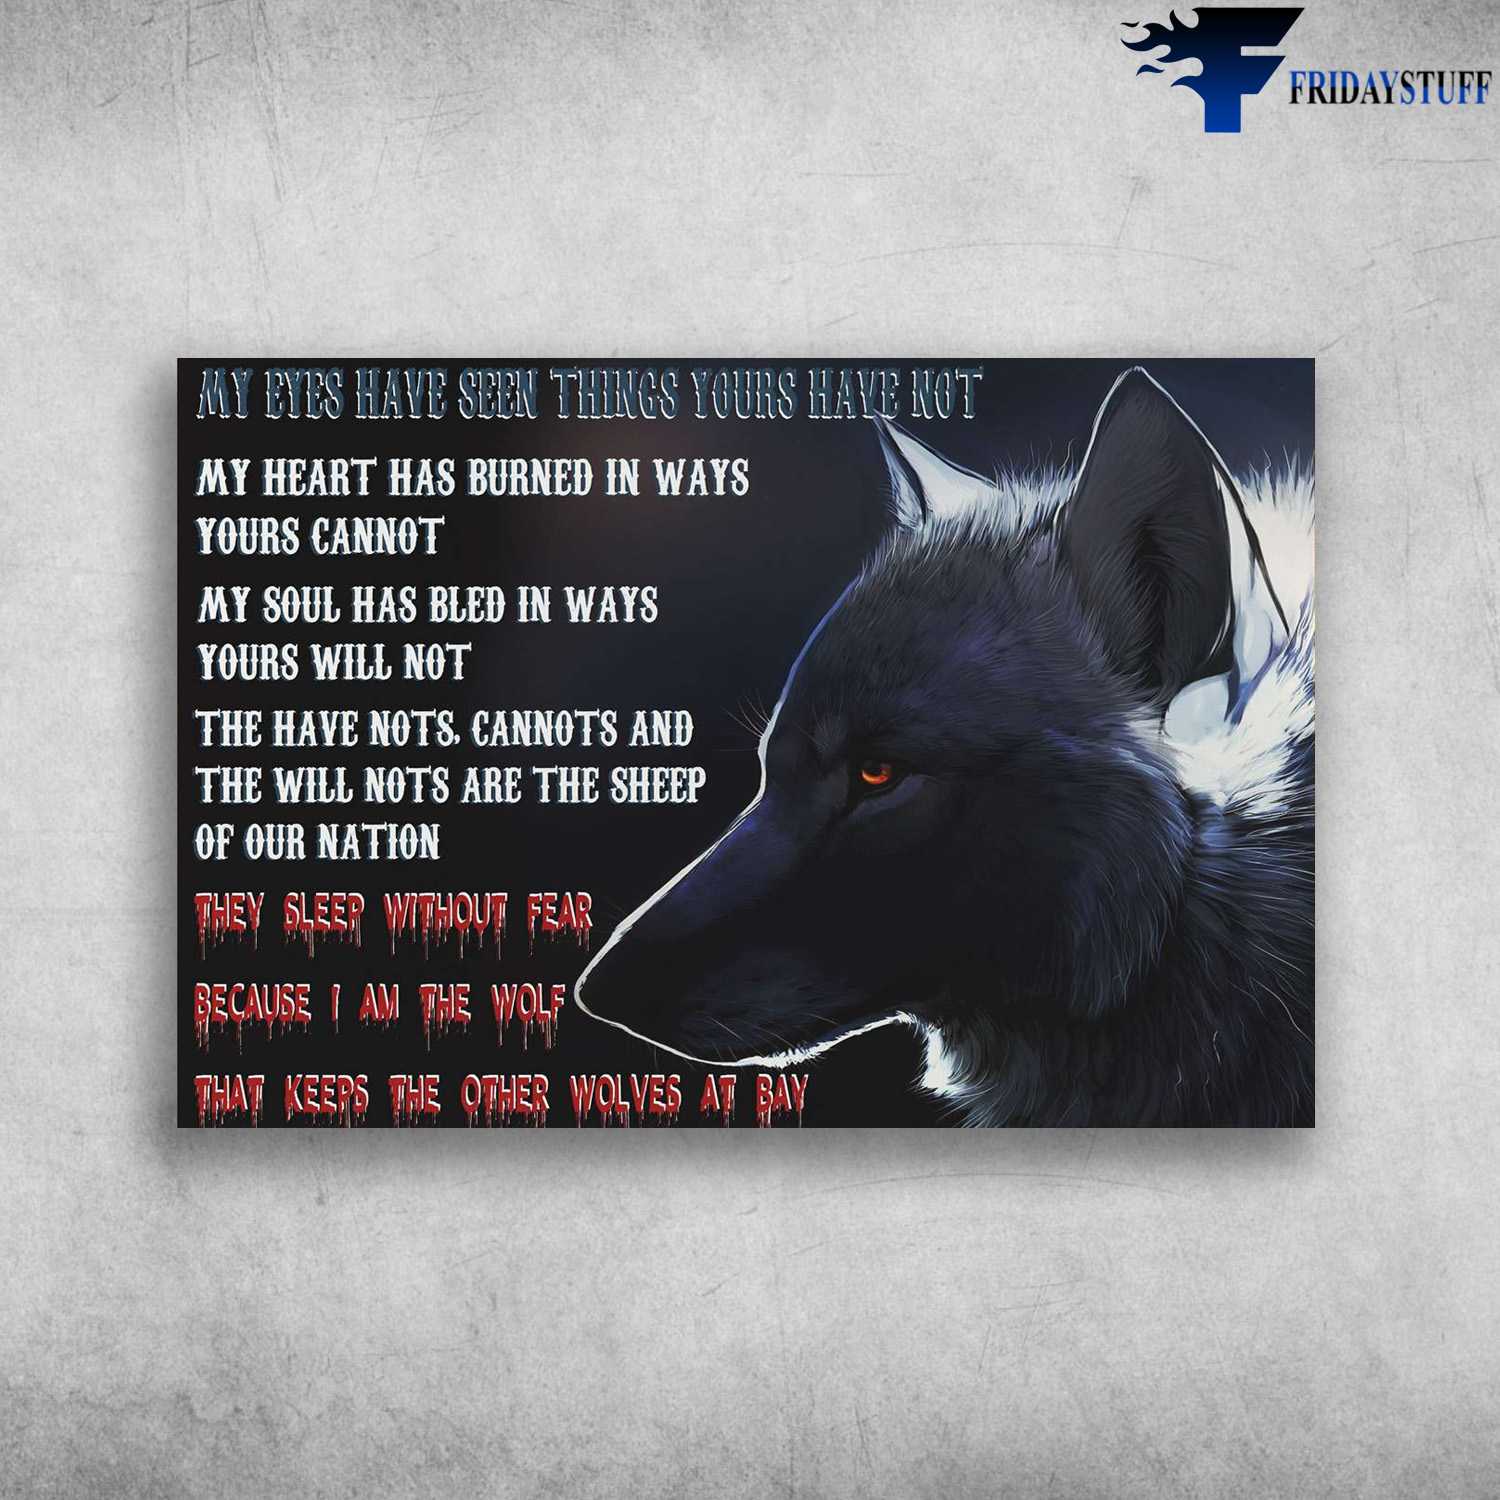 The Wolf - My Eyes Have Seen Things Your Have Not, My Heart Has Burn In Ways, Yours Cannot, My Soul Has Bled In Ways, Yours Will Not, The Have Nots Cannot And, The Will Nots Are The Sheep, Of Our Nation